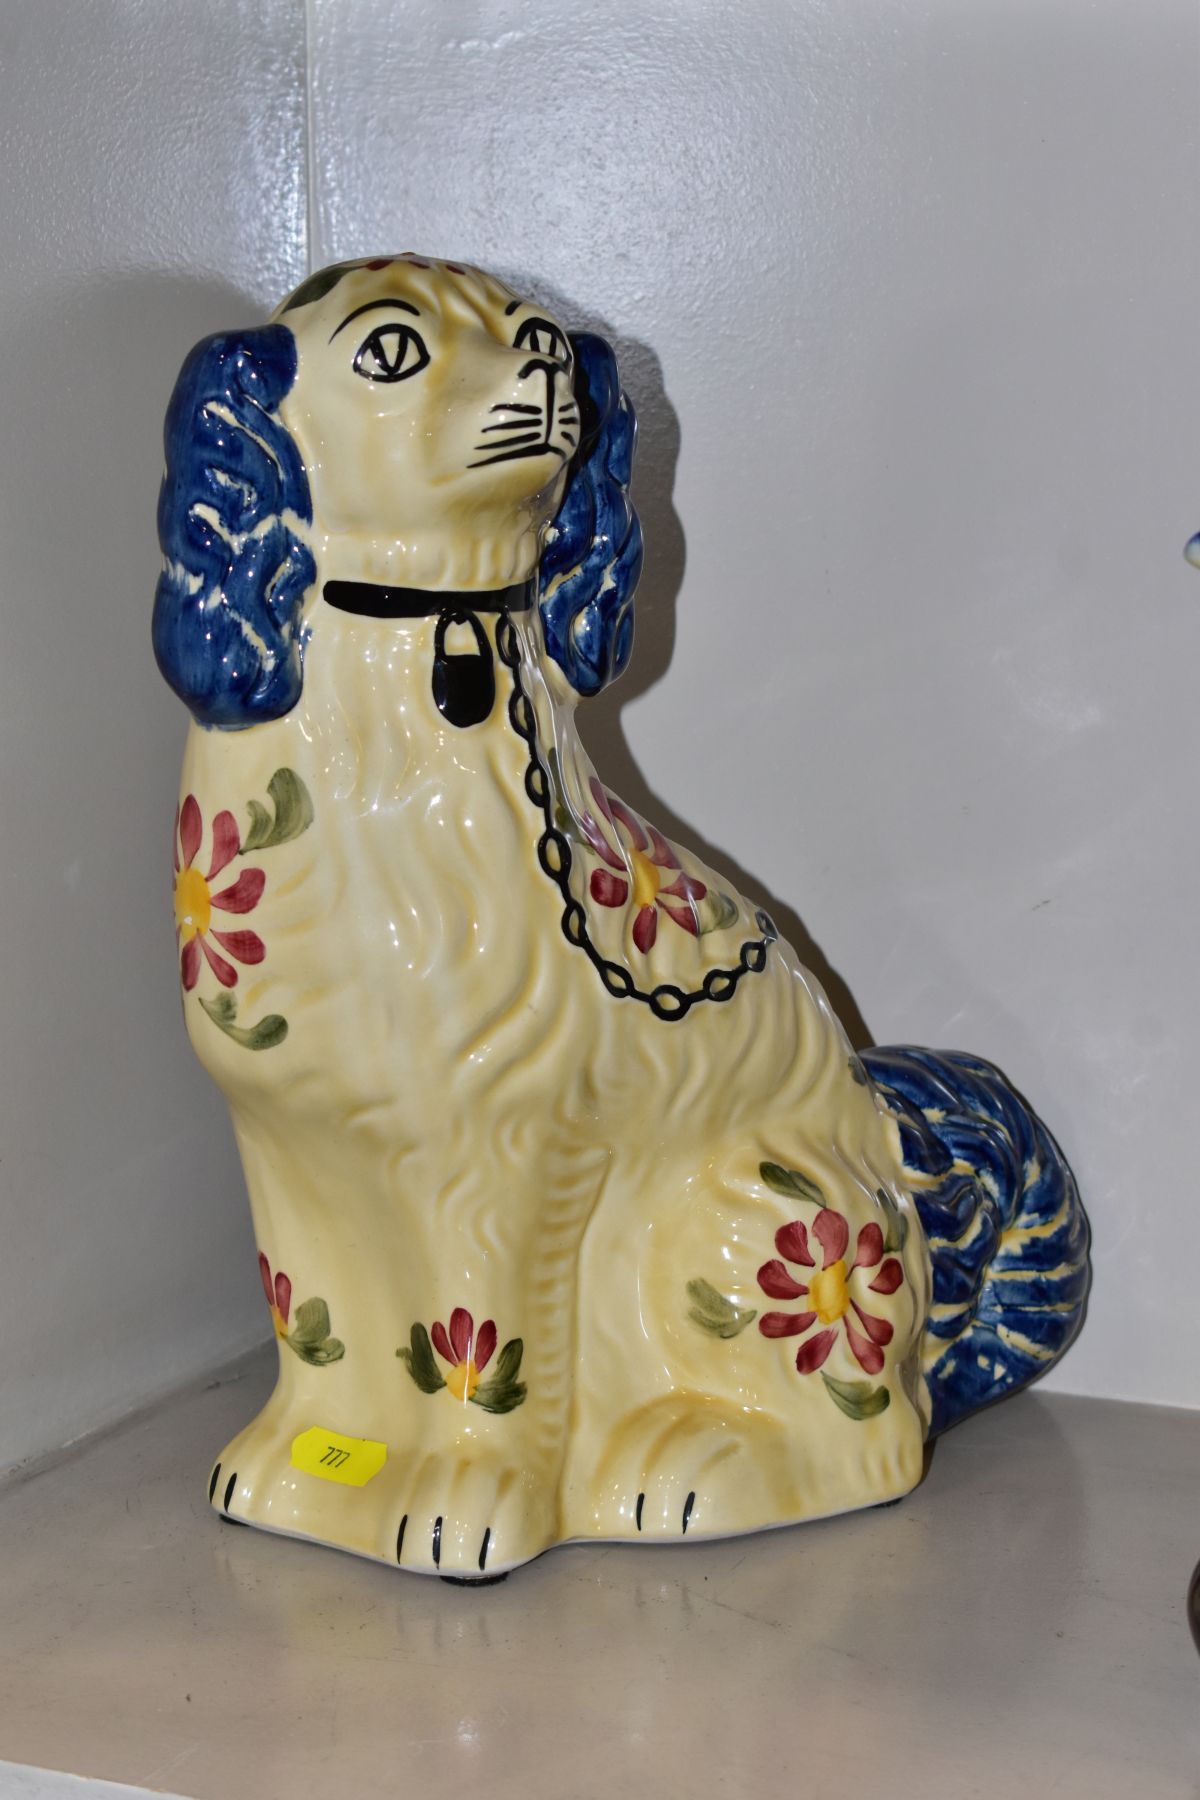 MODERN STAFFORDSHIRE CERAMICS, comprising a pair of Staffordshire dogs by Siltone Pottery, - Image 3 of 7